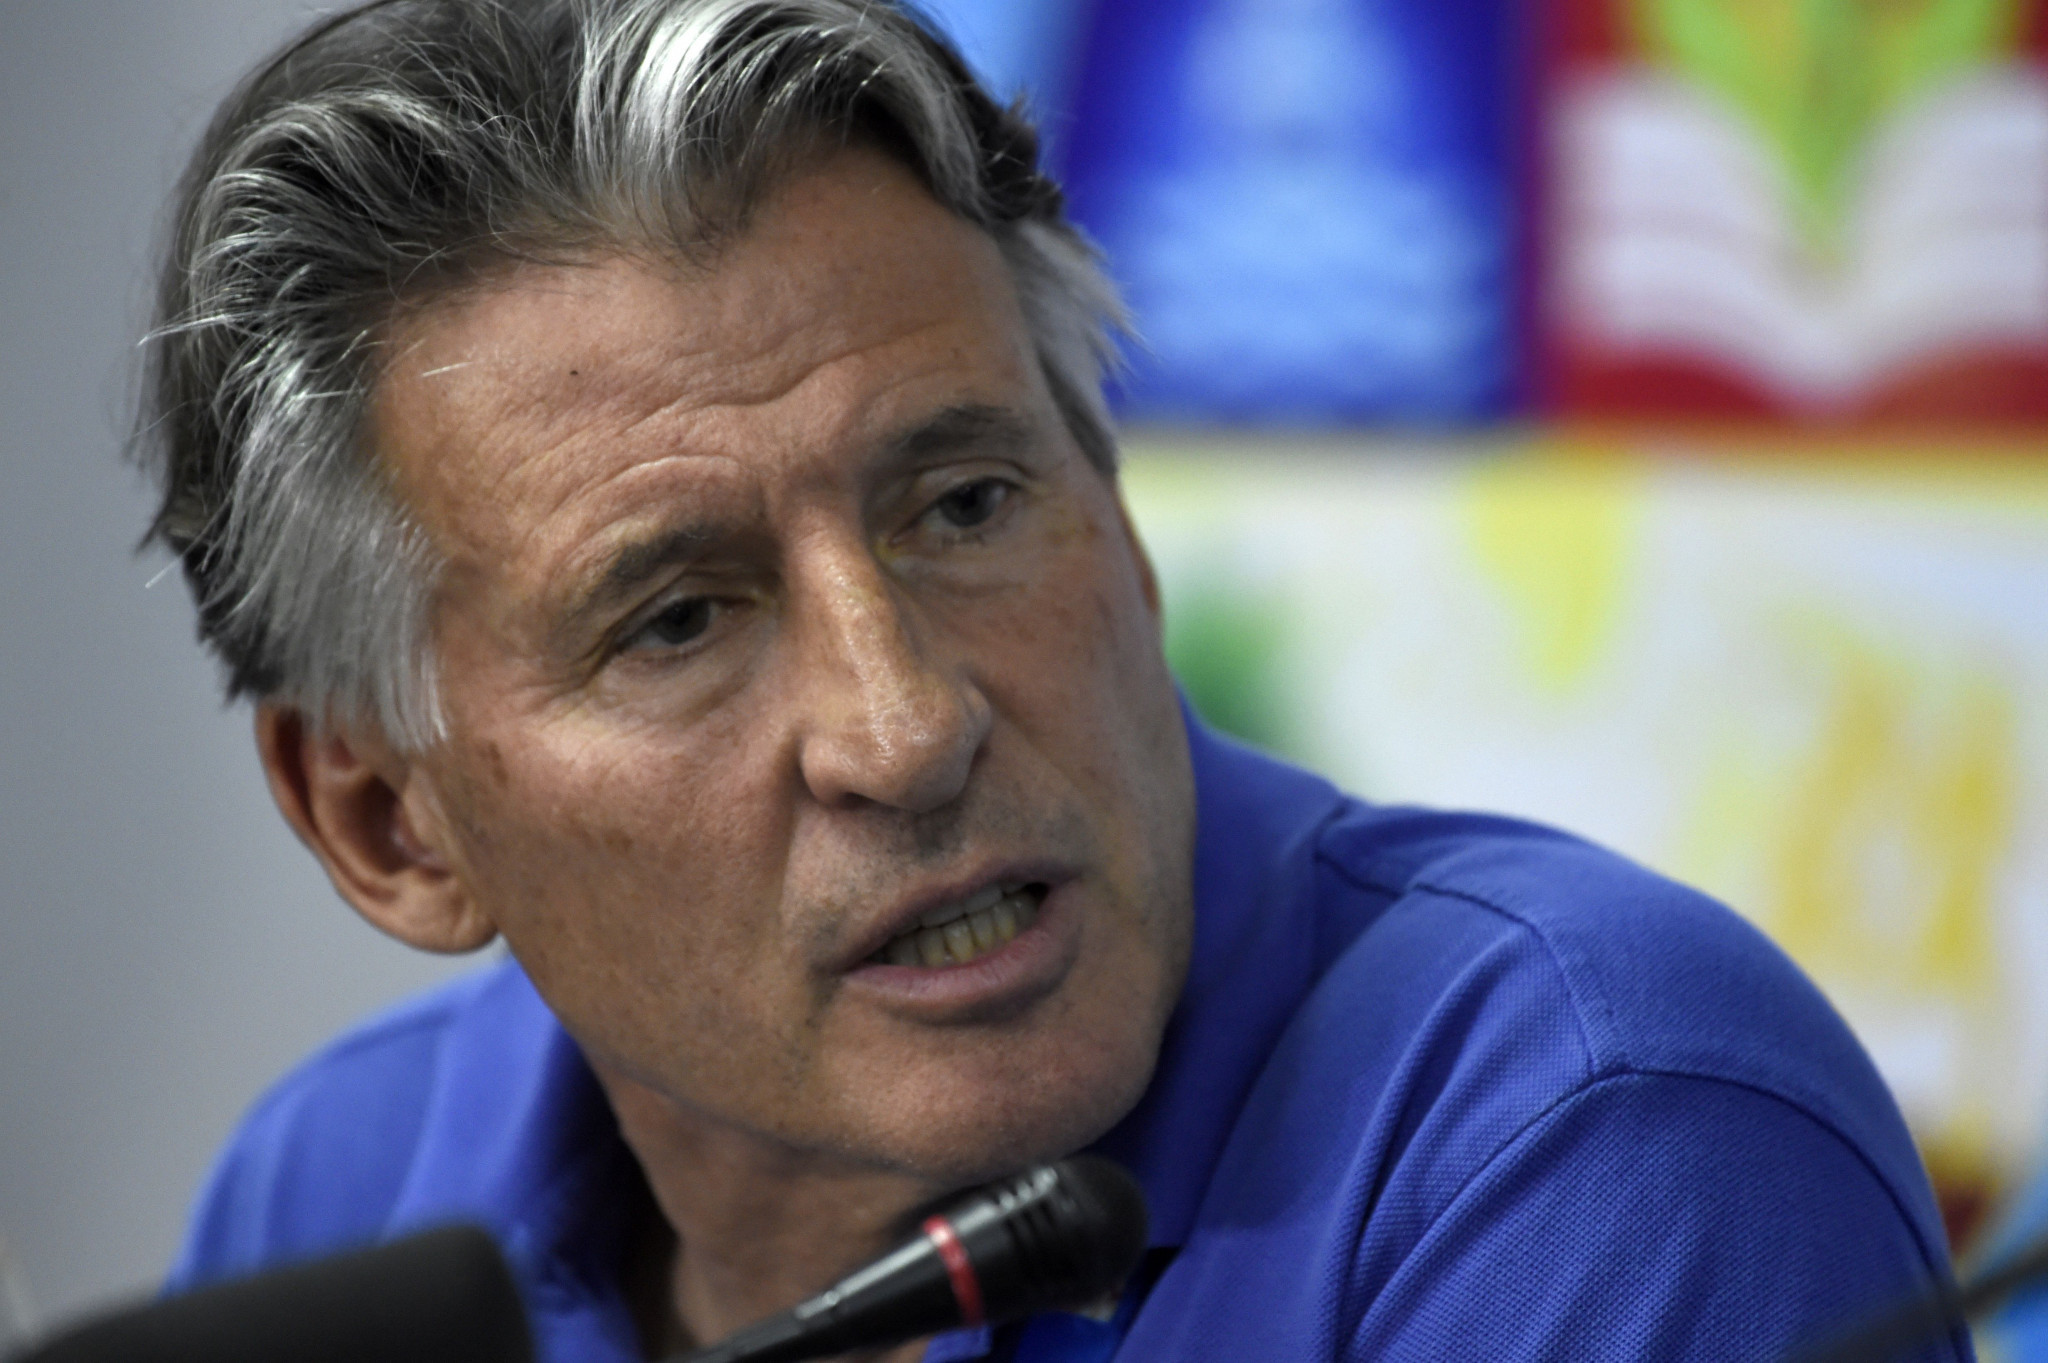 Coe hopeful all countries will attend 2019 IAAF World Championships in Doha despite diplomatic dispute